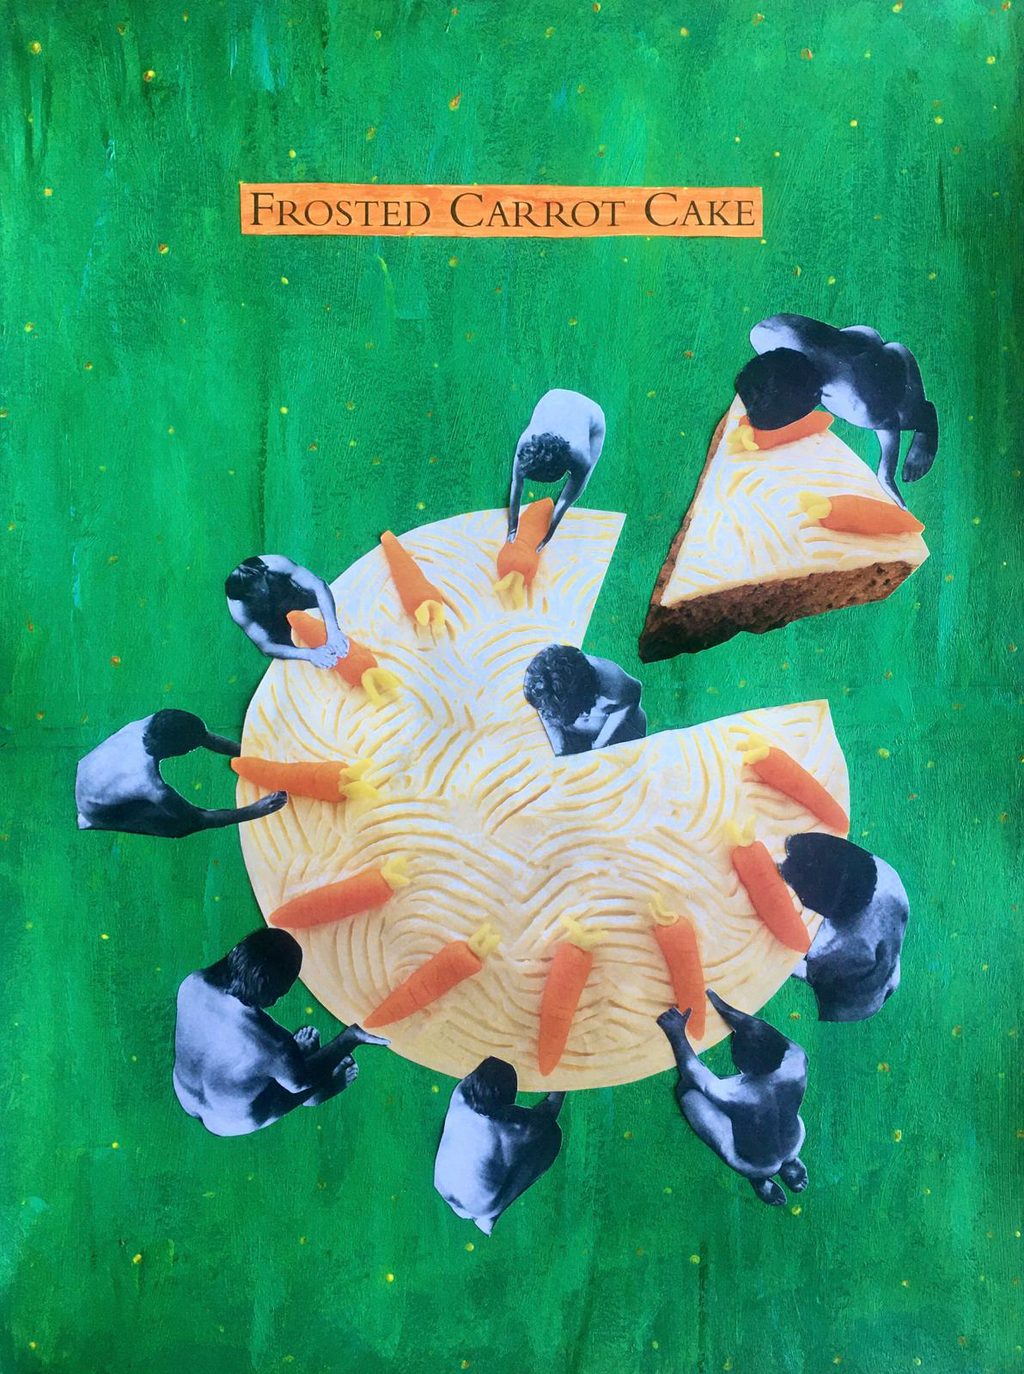 Frosted Carrot Cake Hand-Painted Analogue Collage